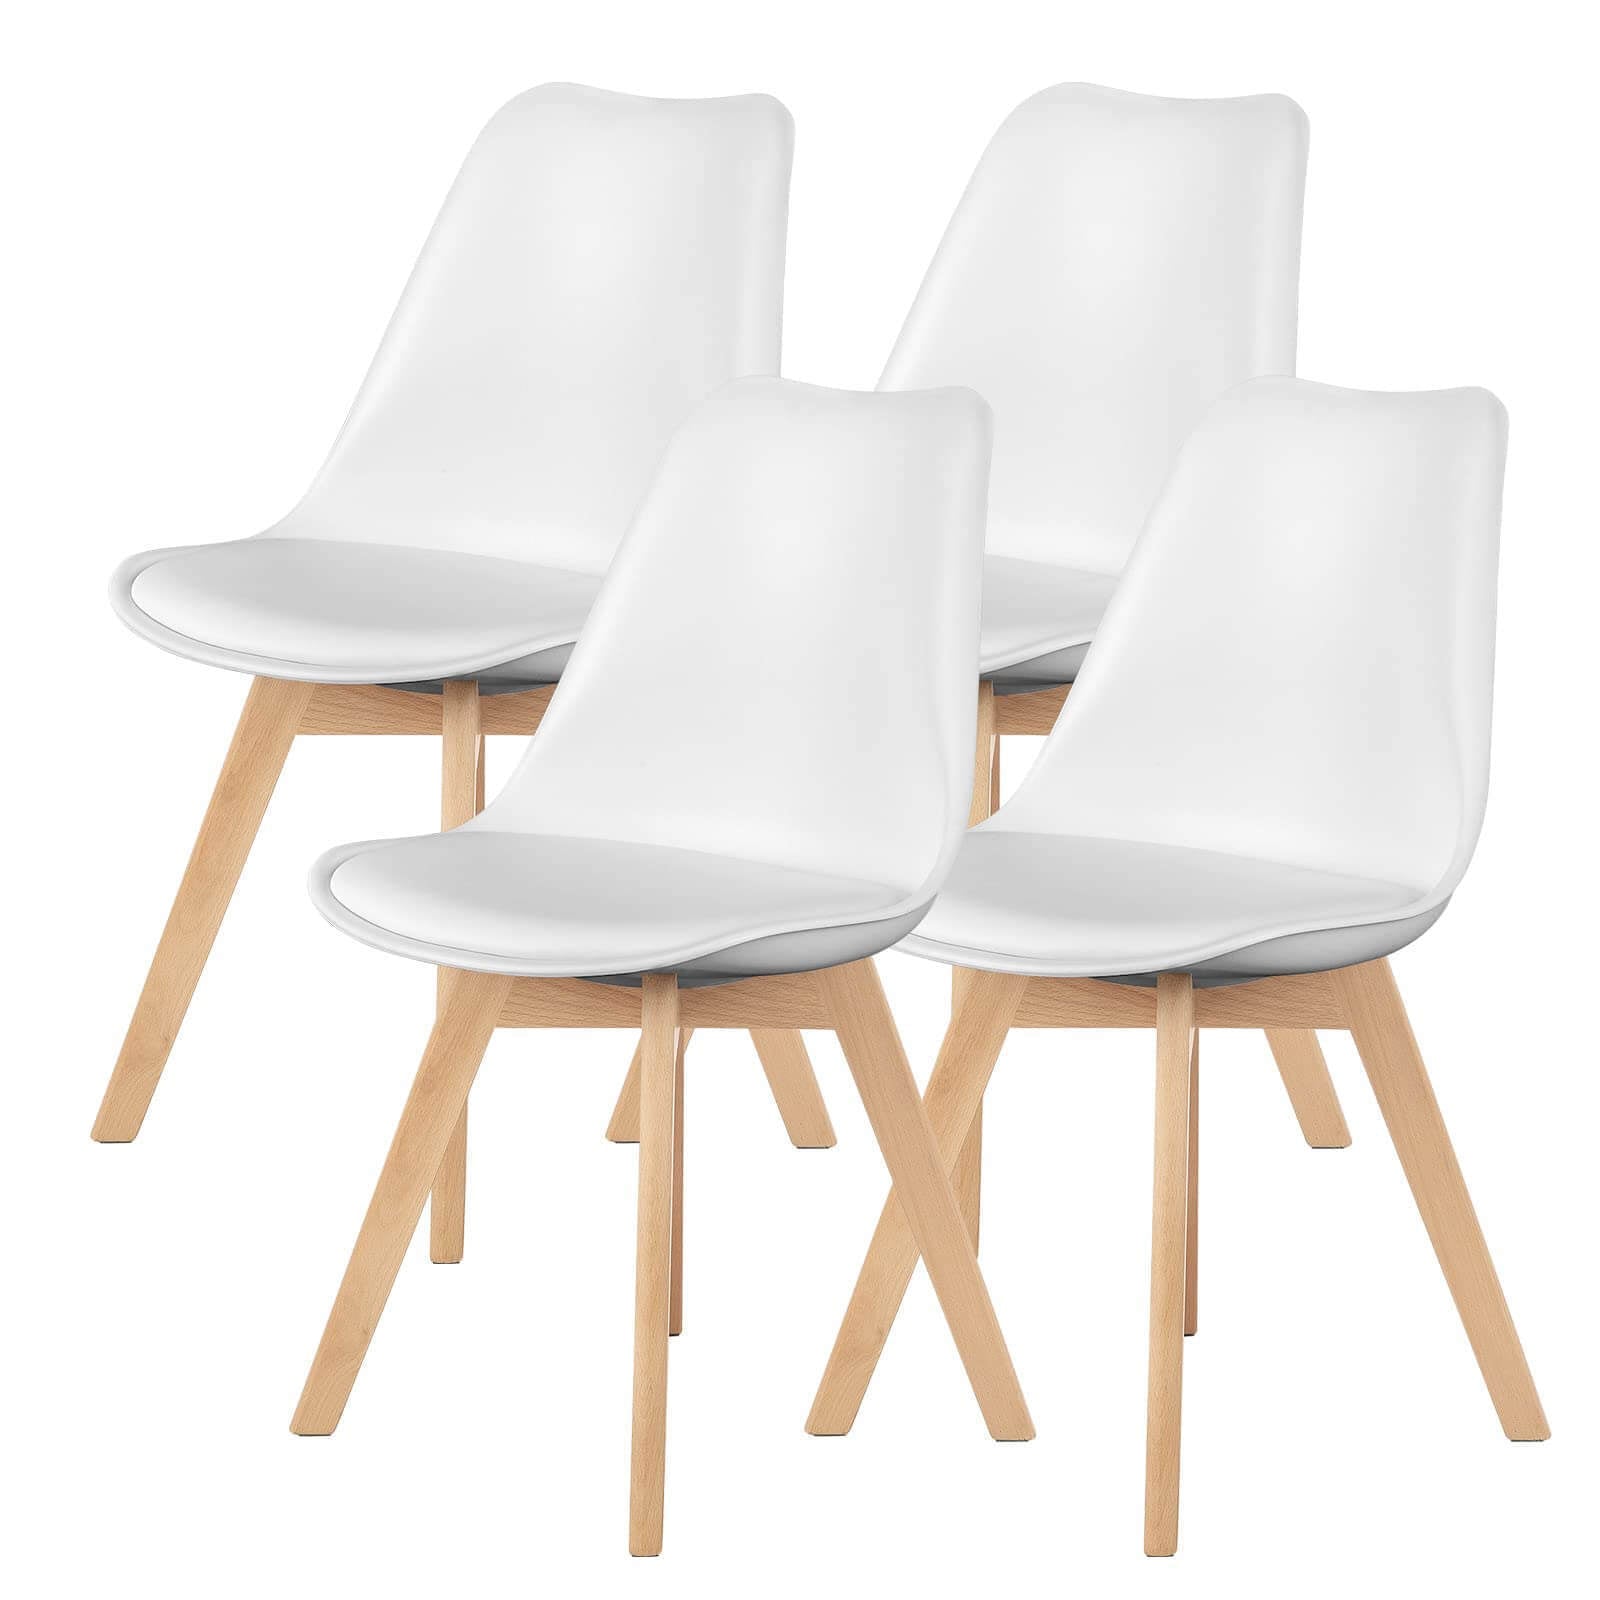 PU Leather Upholstered Dining Chairs with Wood Legs, Set of 4 (White)